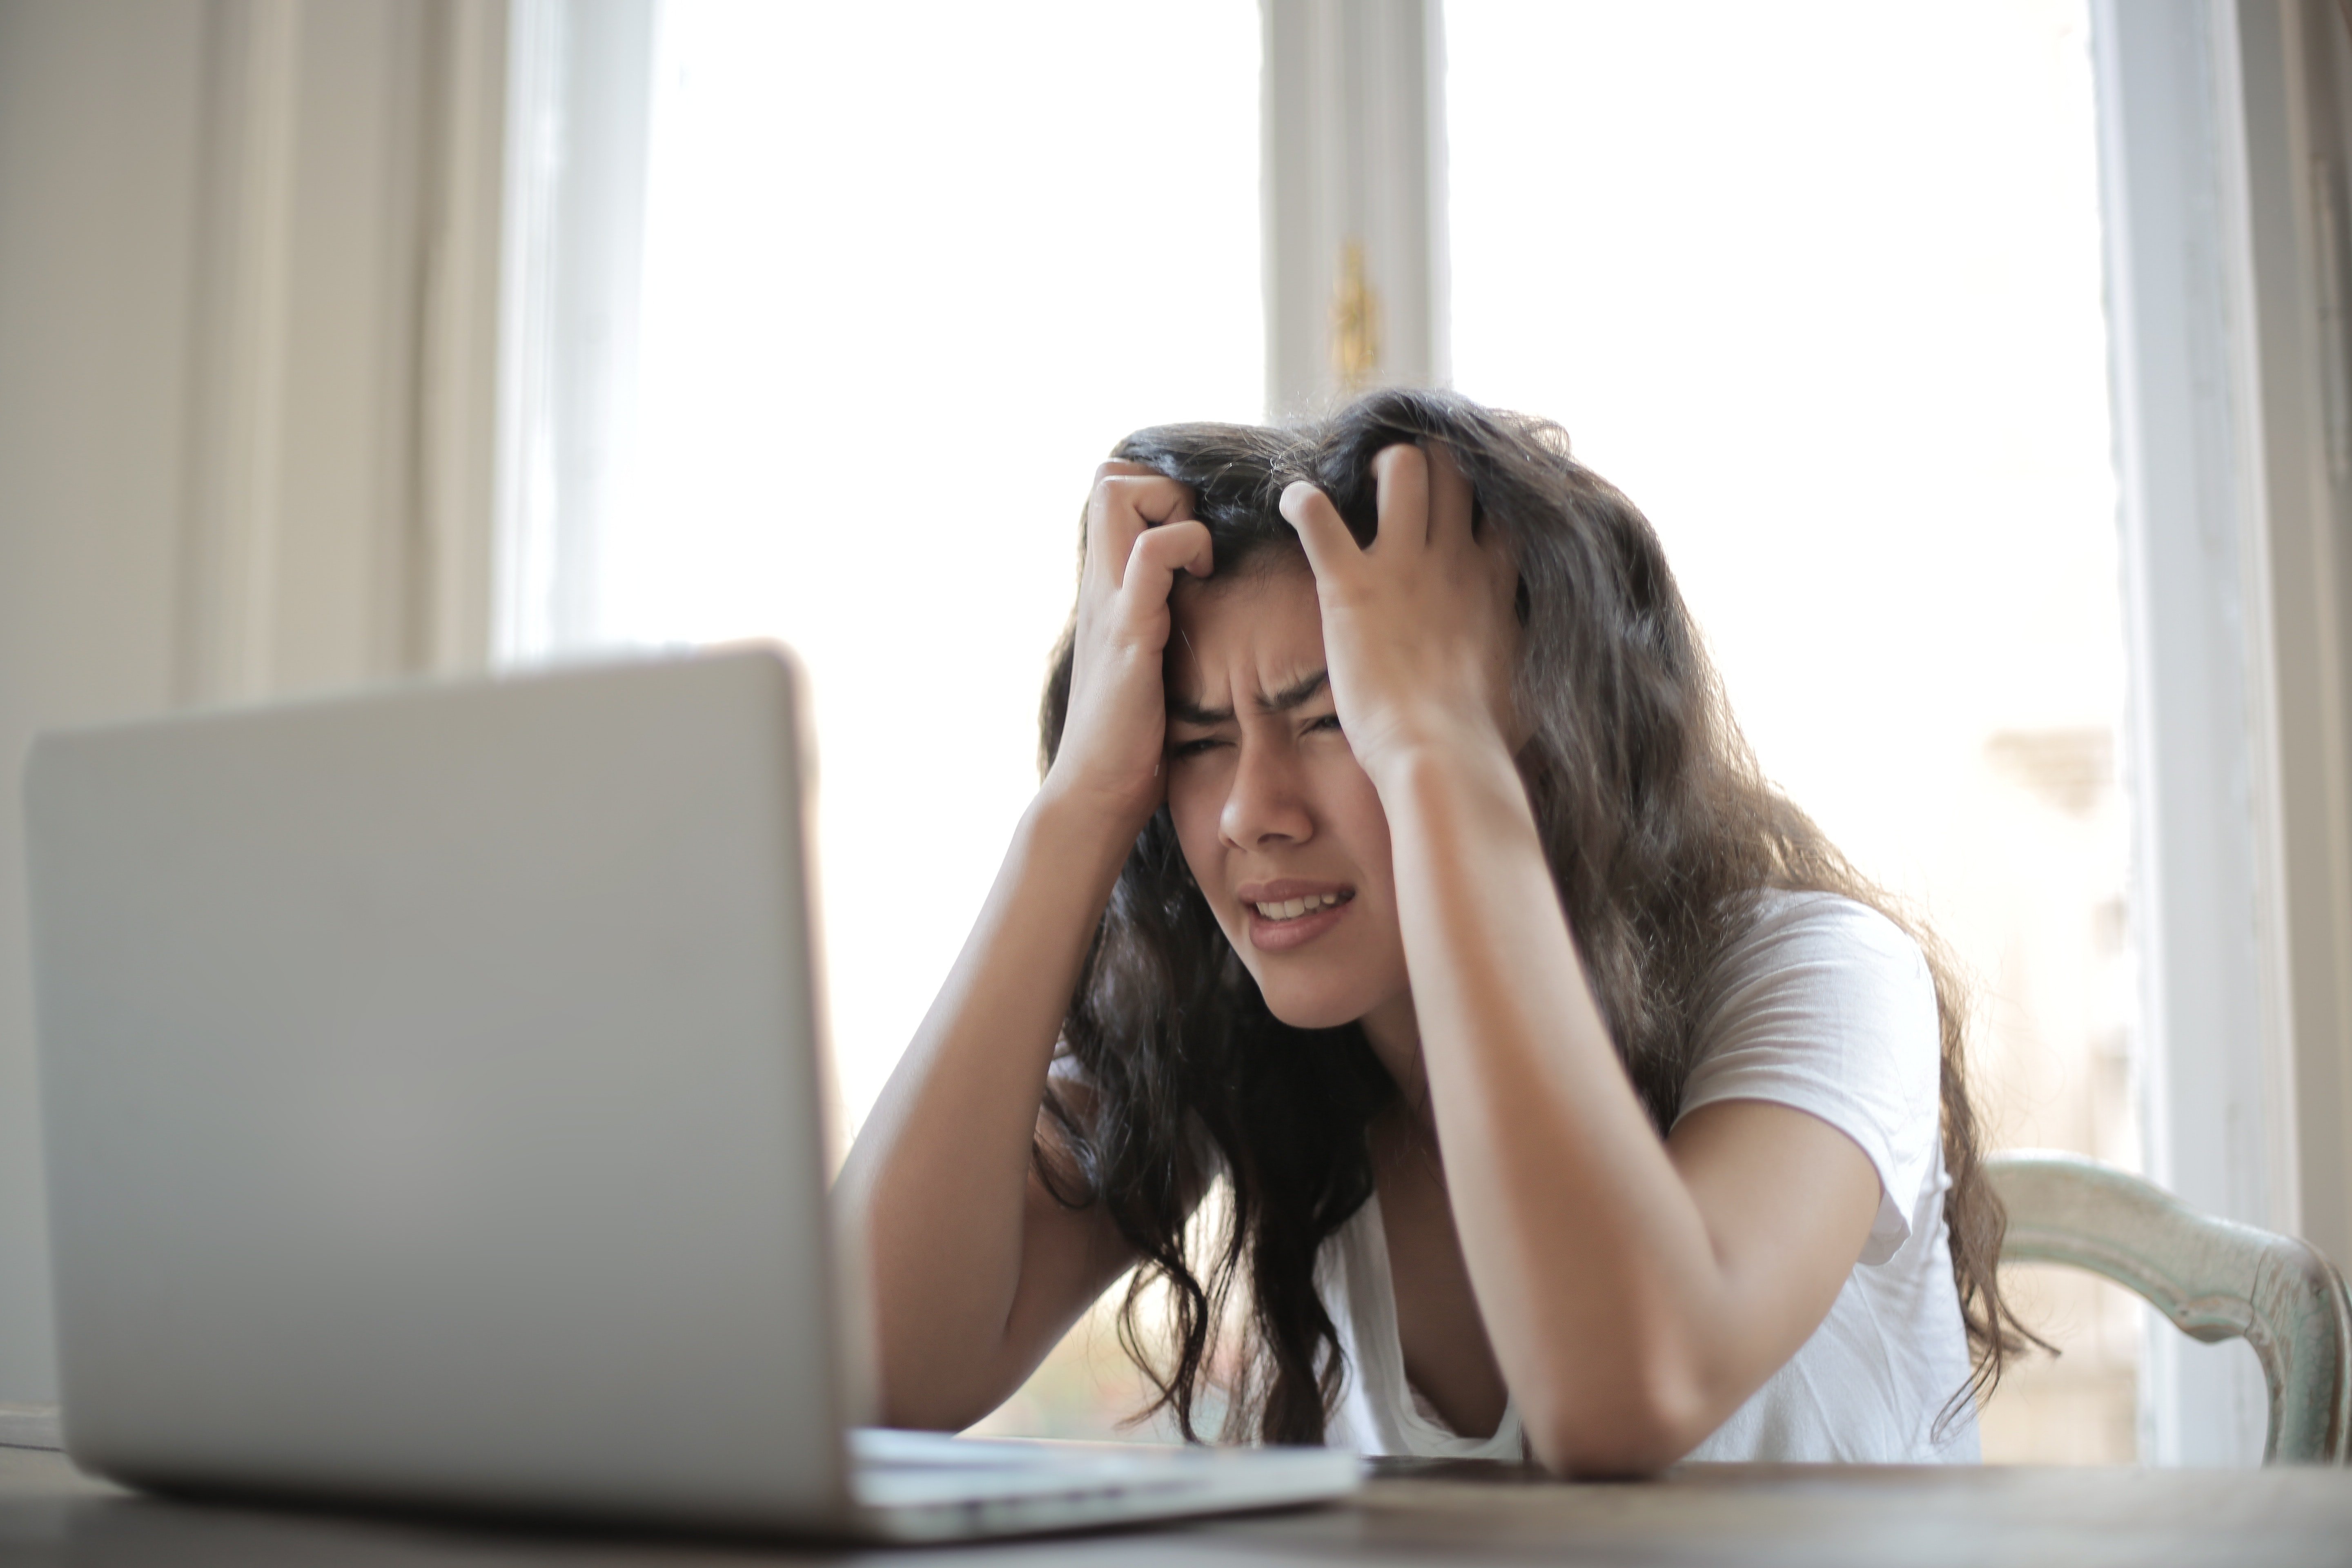 A woman showing signs of stress in front of her laptop | Source: Pexels